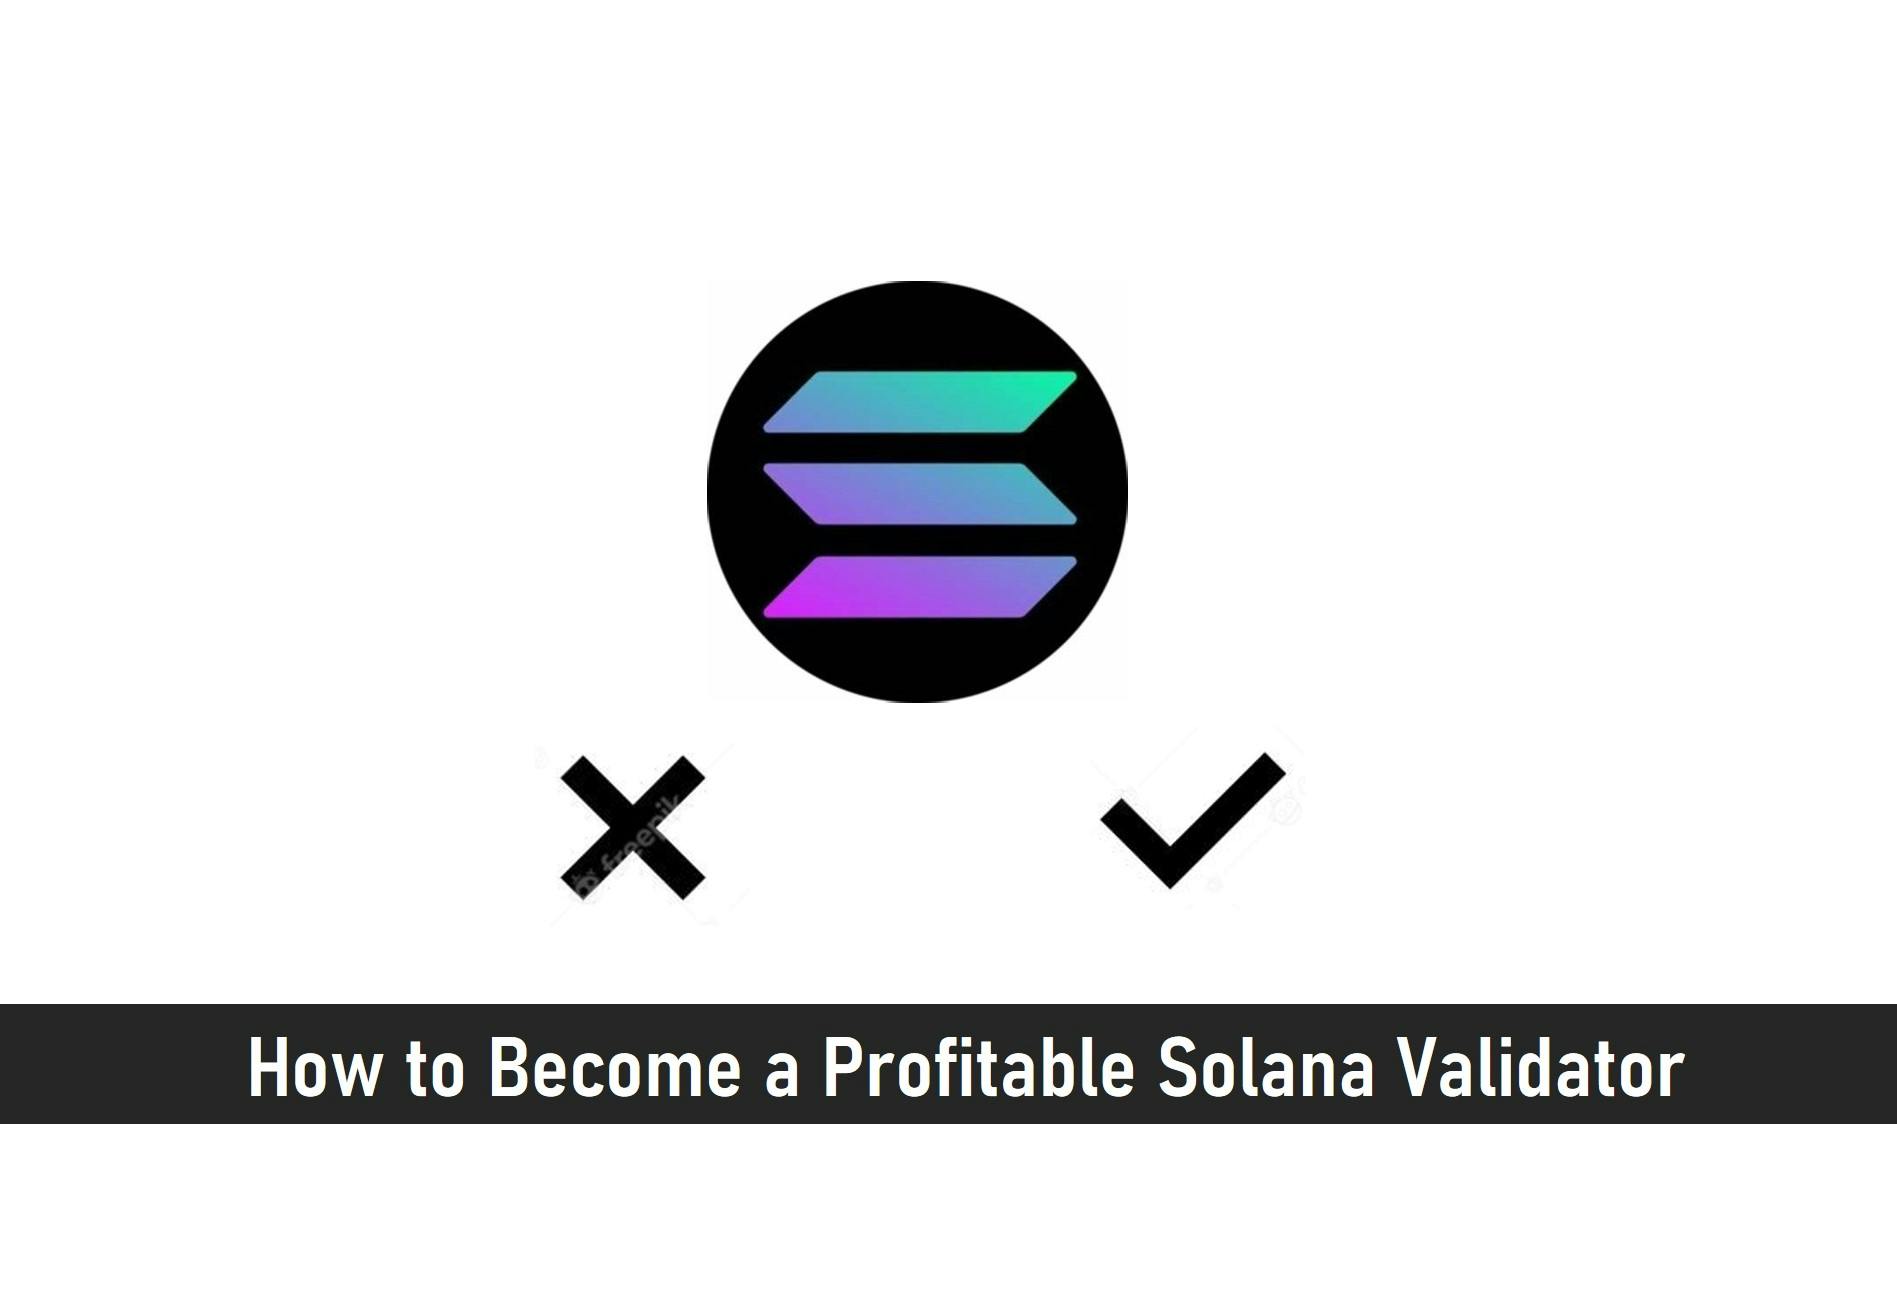 How to Become a Profitable Solana Validator